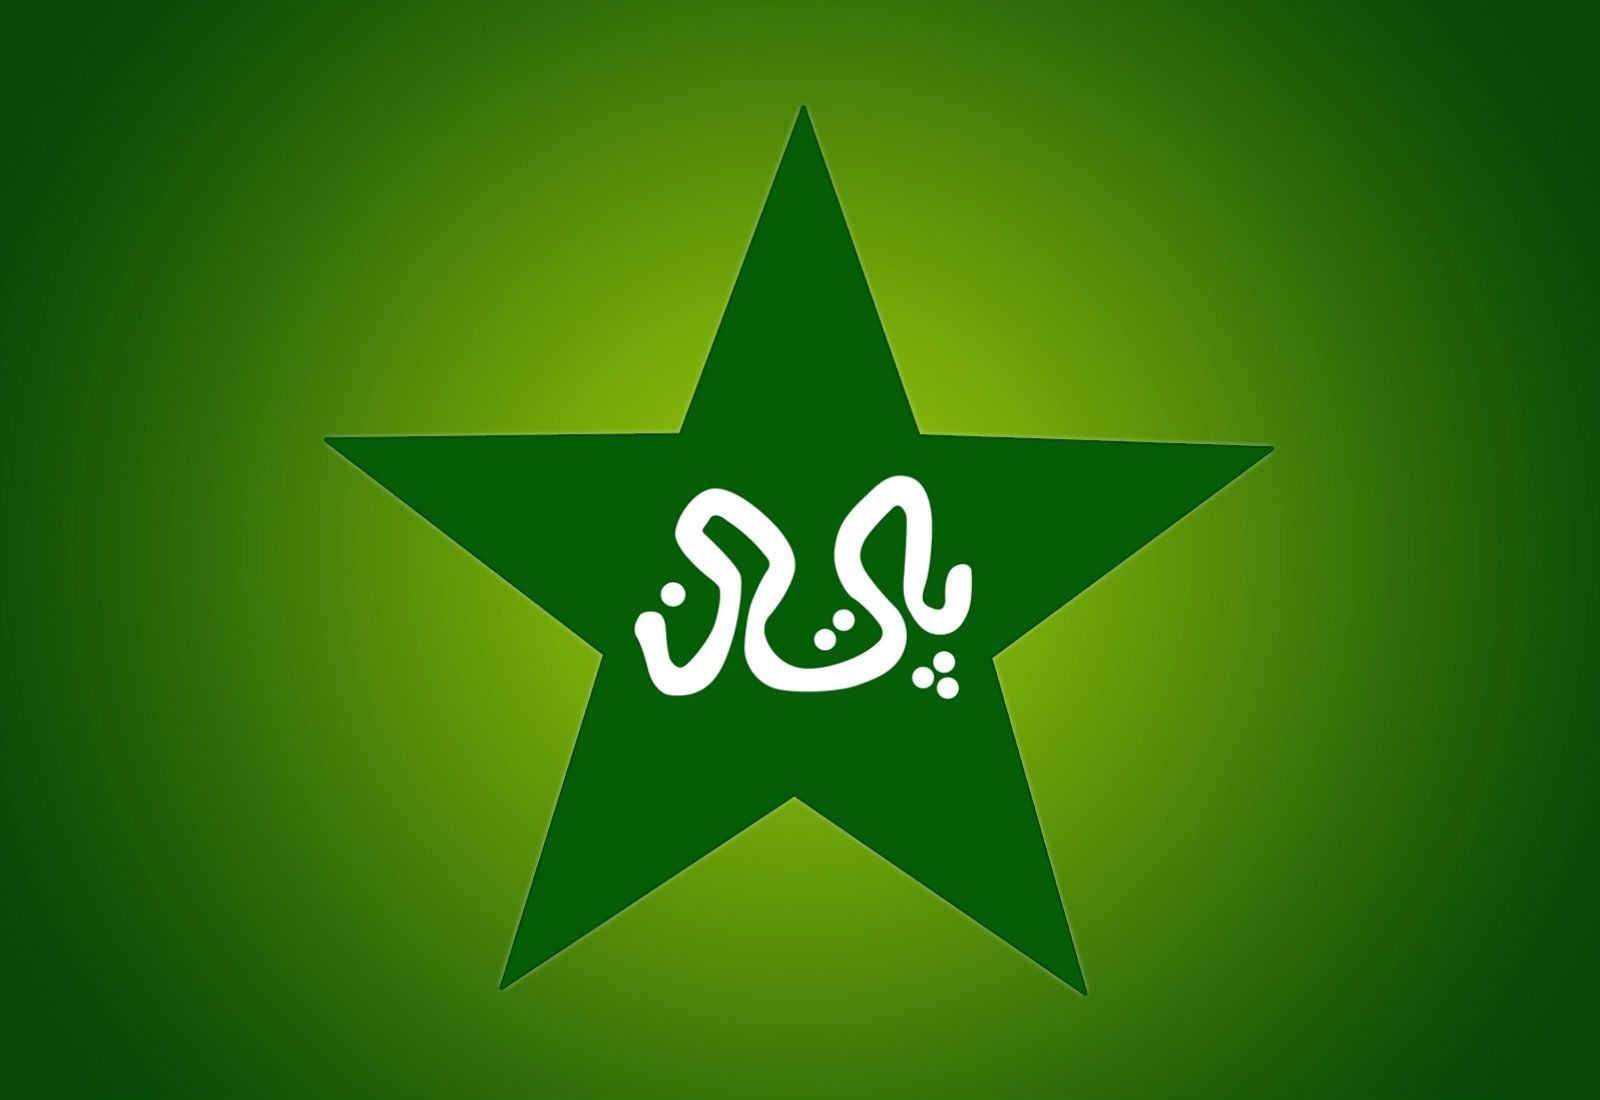 PAKISTAN CRICKET EXCHANGE: LISTING CRICKETERS LIKE STOCKS COULD BE